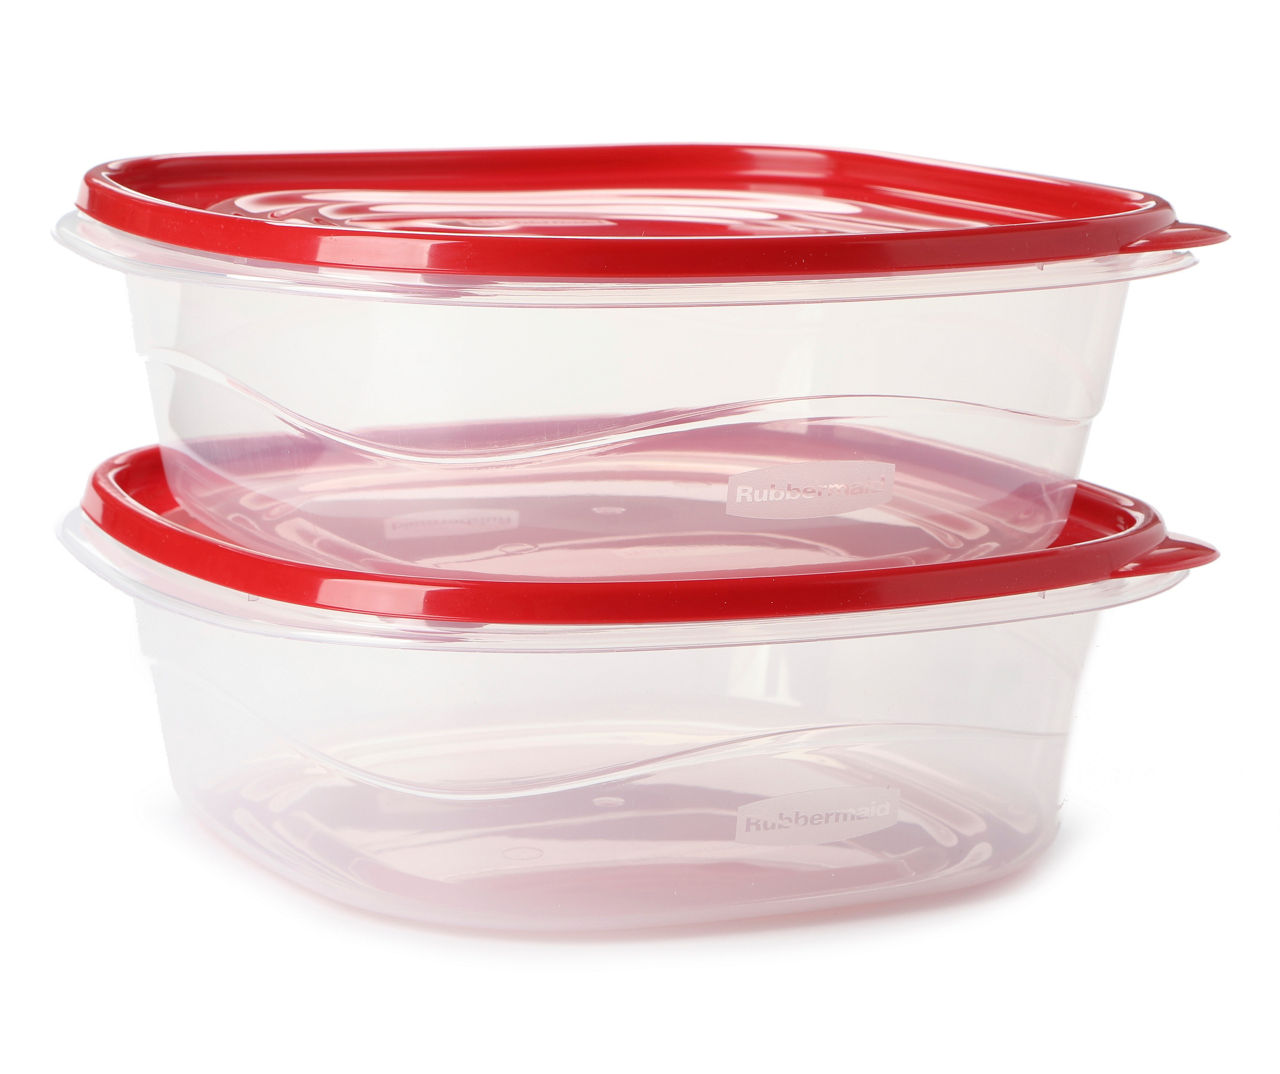 Rubbermaid TakeAlongs 11.7 Cups Large Square Containers, 2-Pack